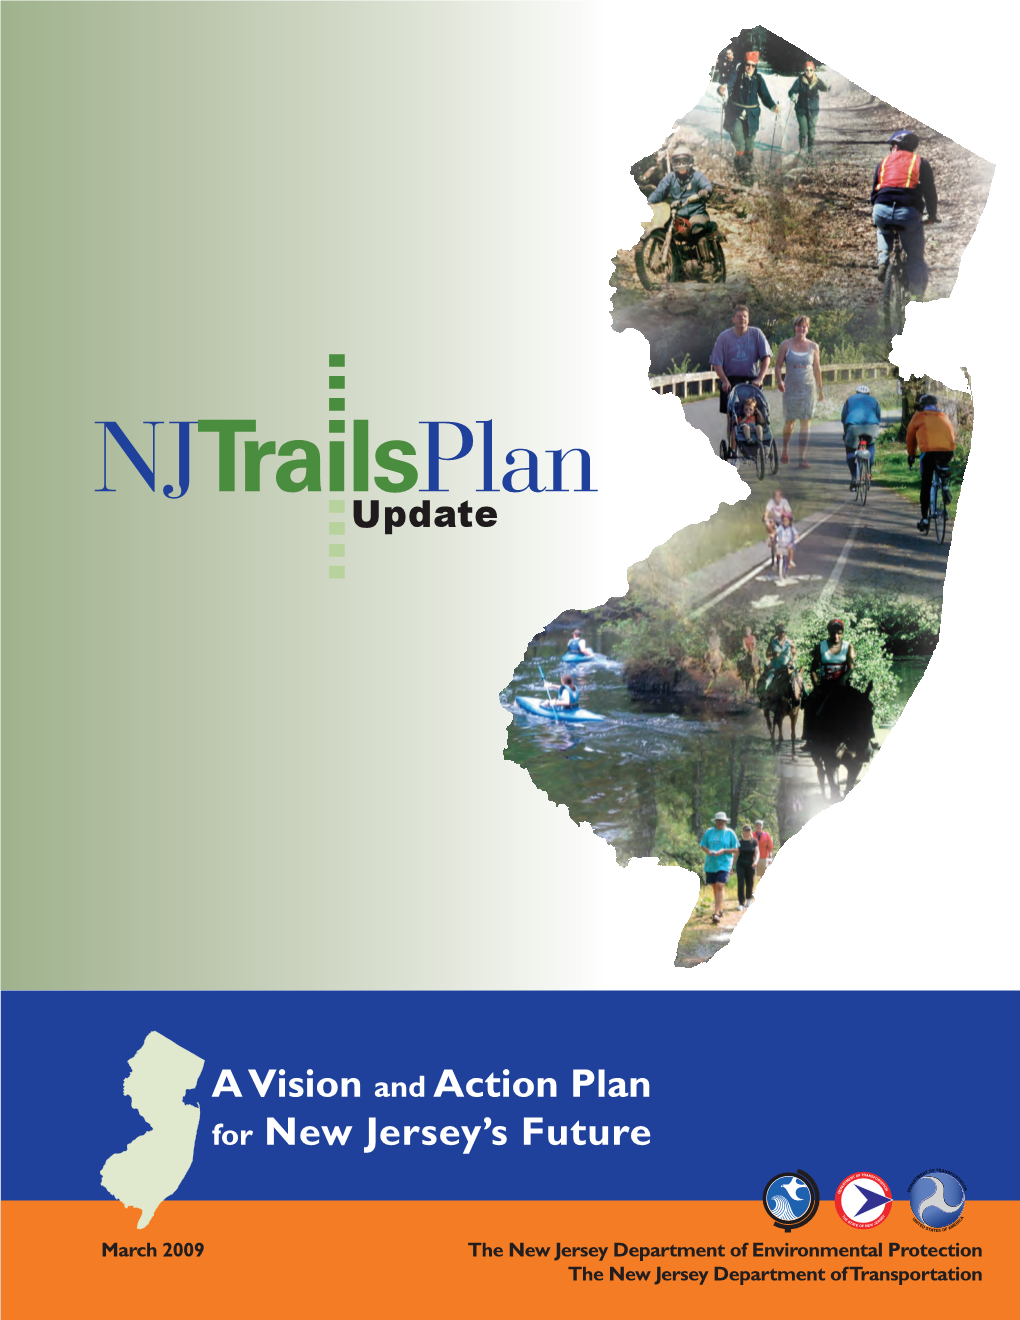 Trails Plan Update, and Many Members Also Served on the Trails Plan Advisory Committee